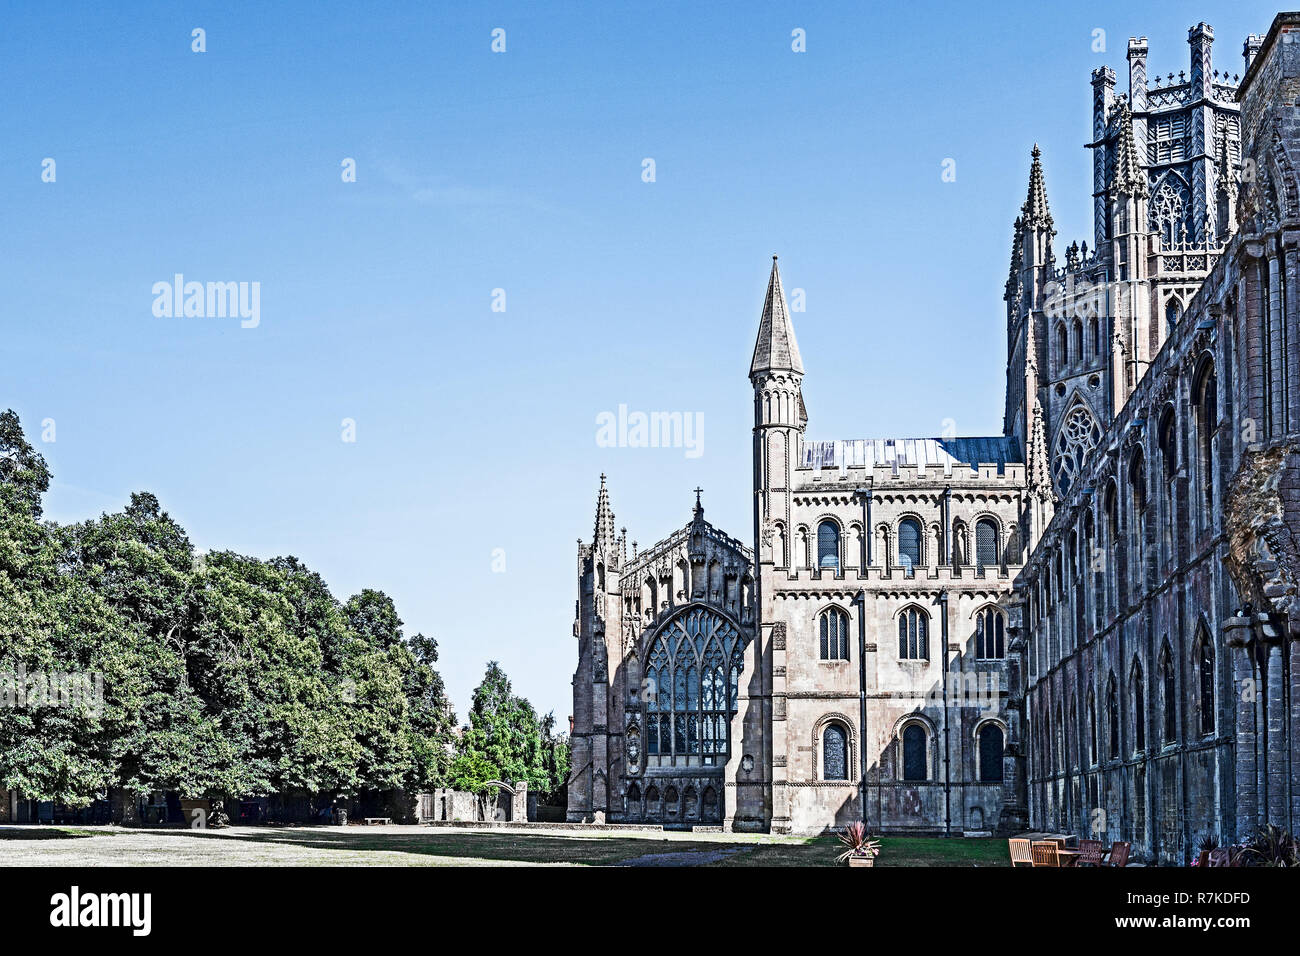 Ely (Cambridgeshire) Cattedrale Foto Stock